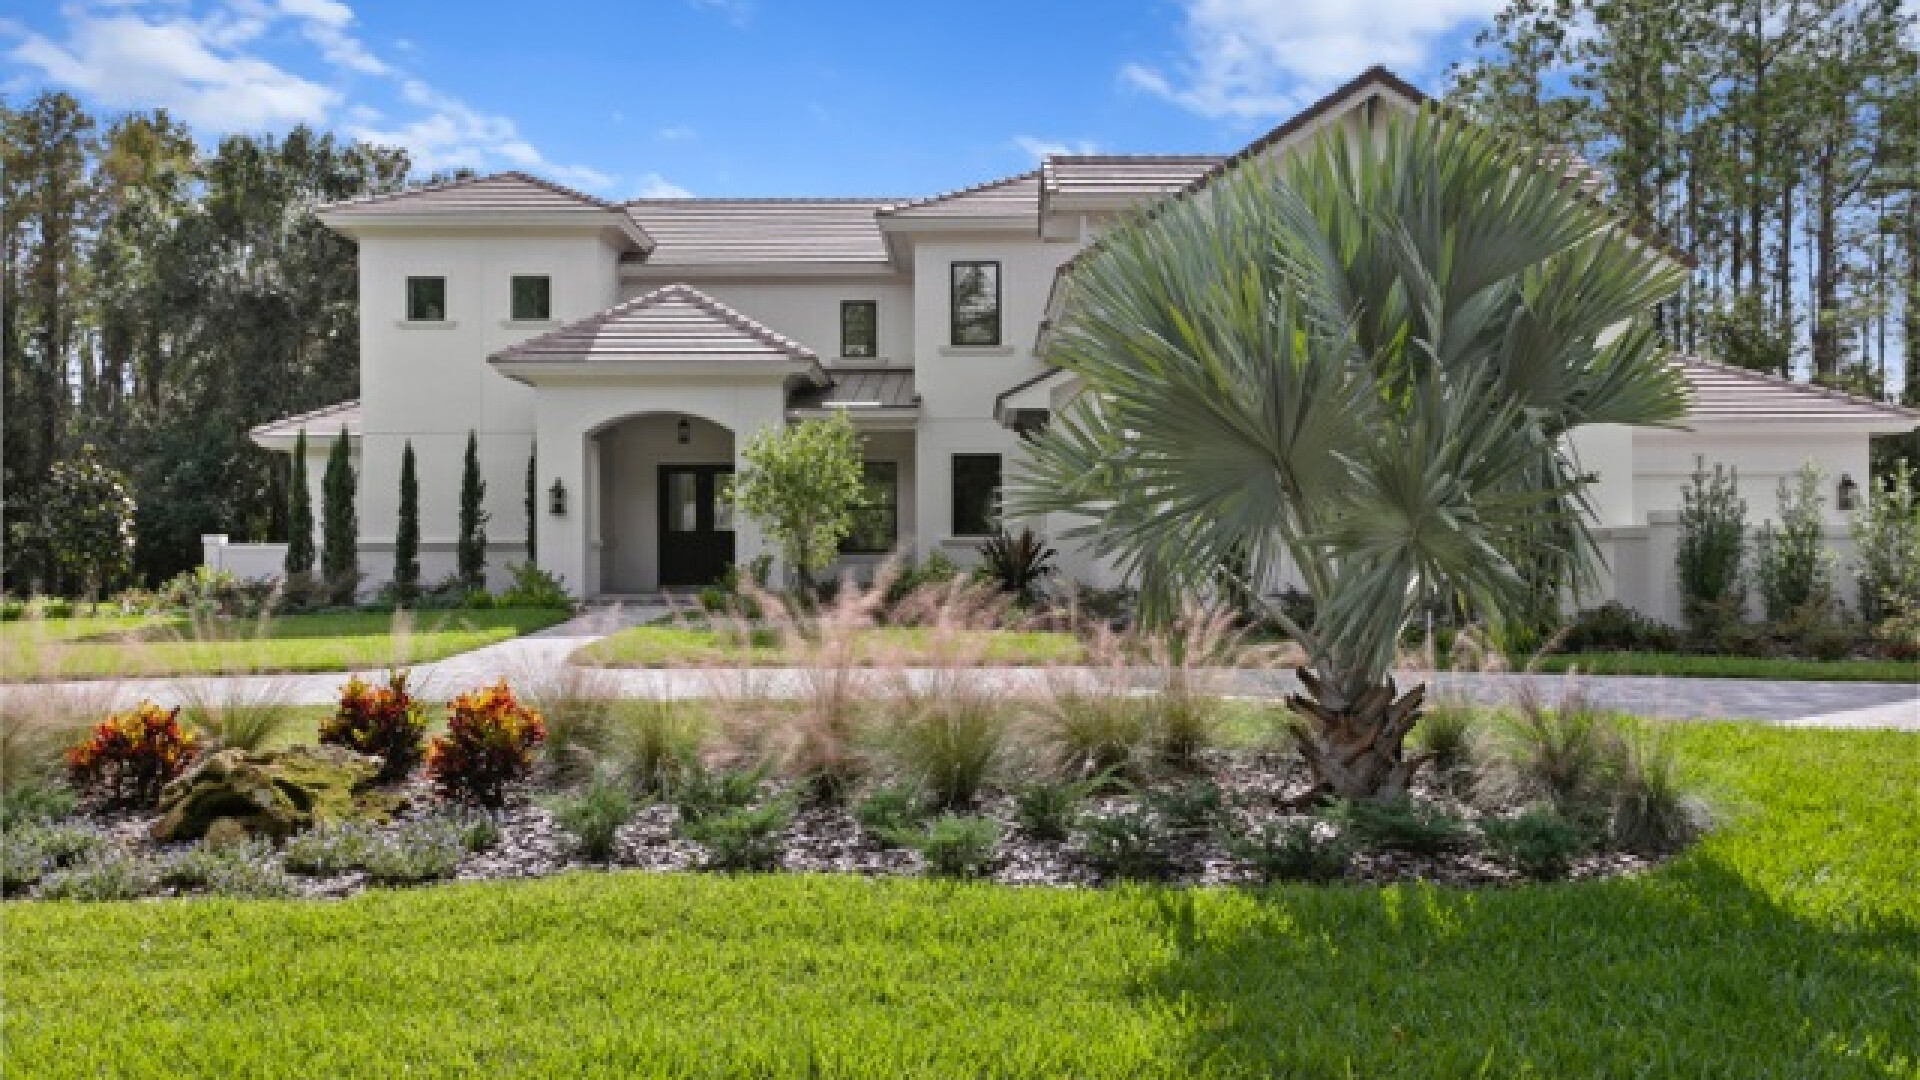 Luxury home designed on a oversized lot that backs up to a pond and golf course in the distance, Tampa FL